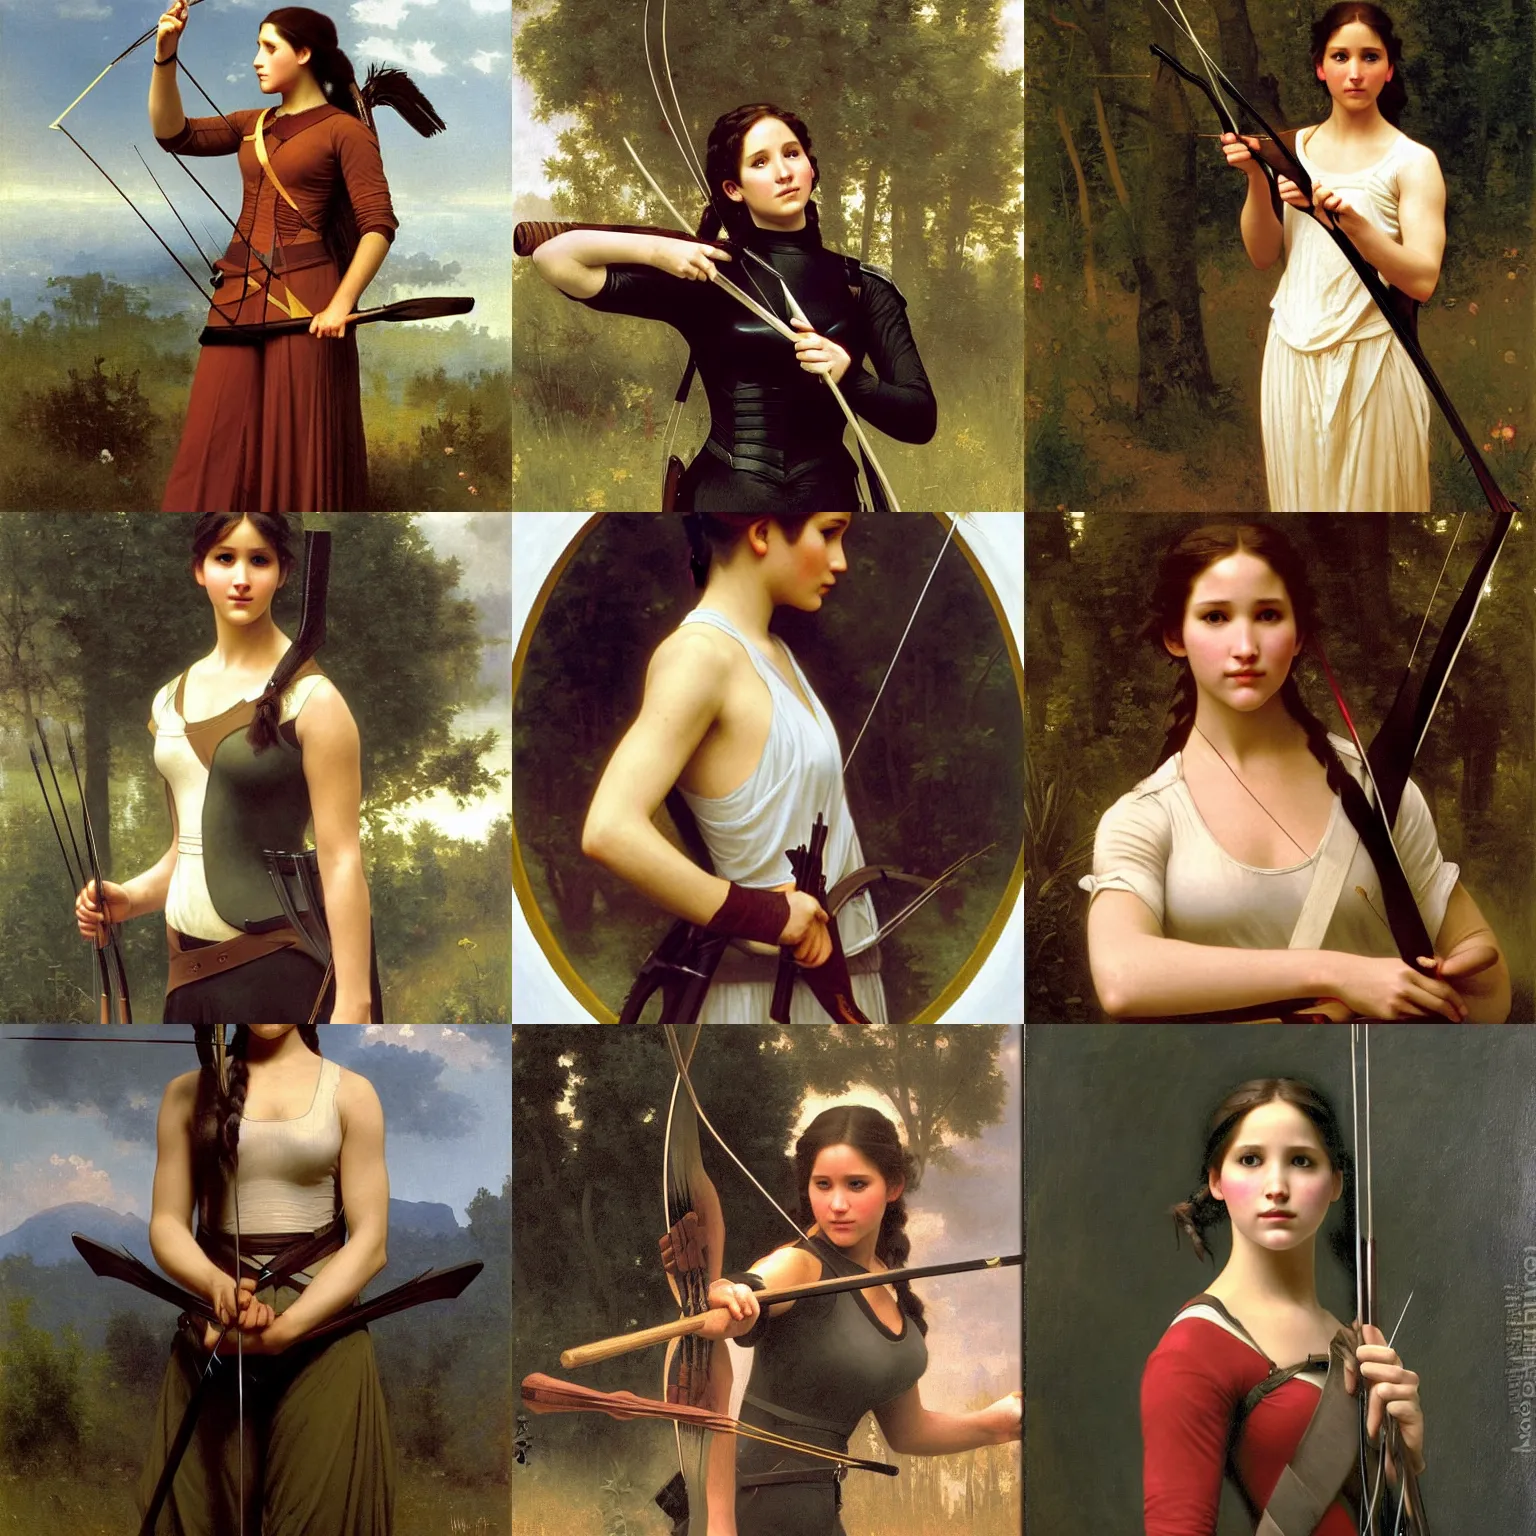 Prompt: Katniss Everdeen from the Hunger Games, with her bow and arrow, oil painting by William-Adolphe Bouguereau